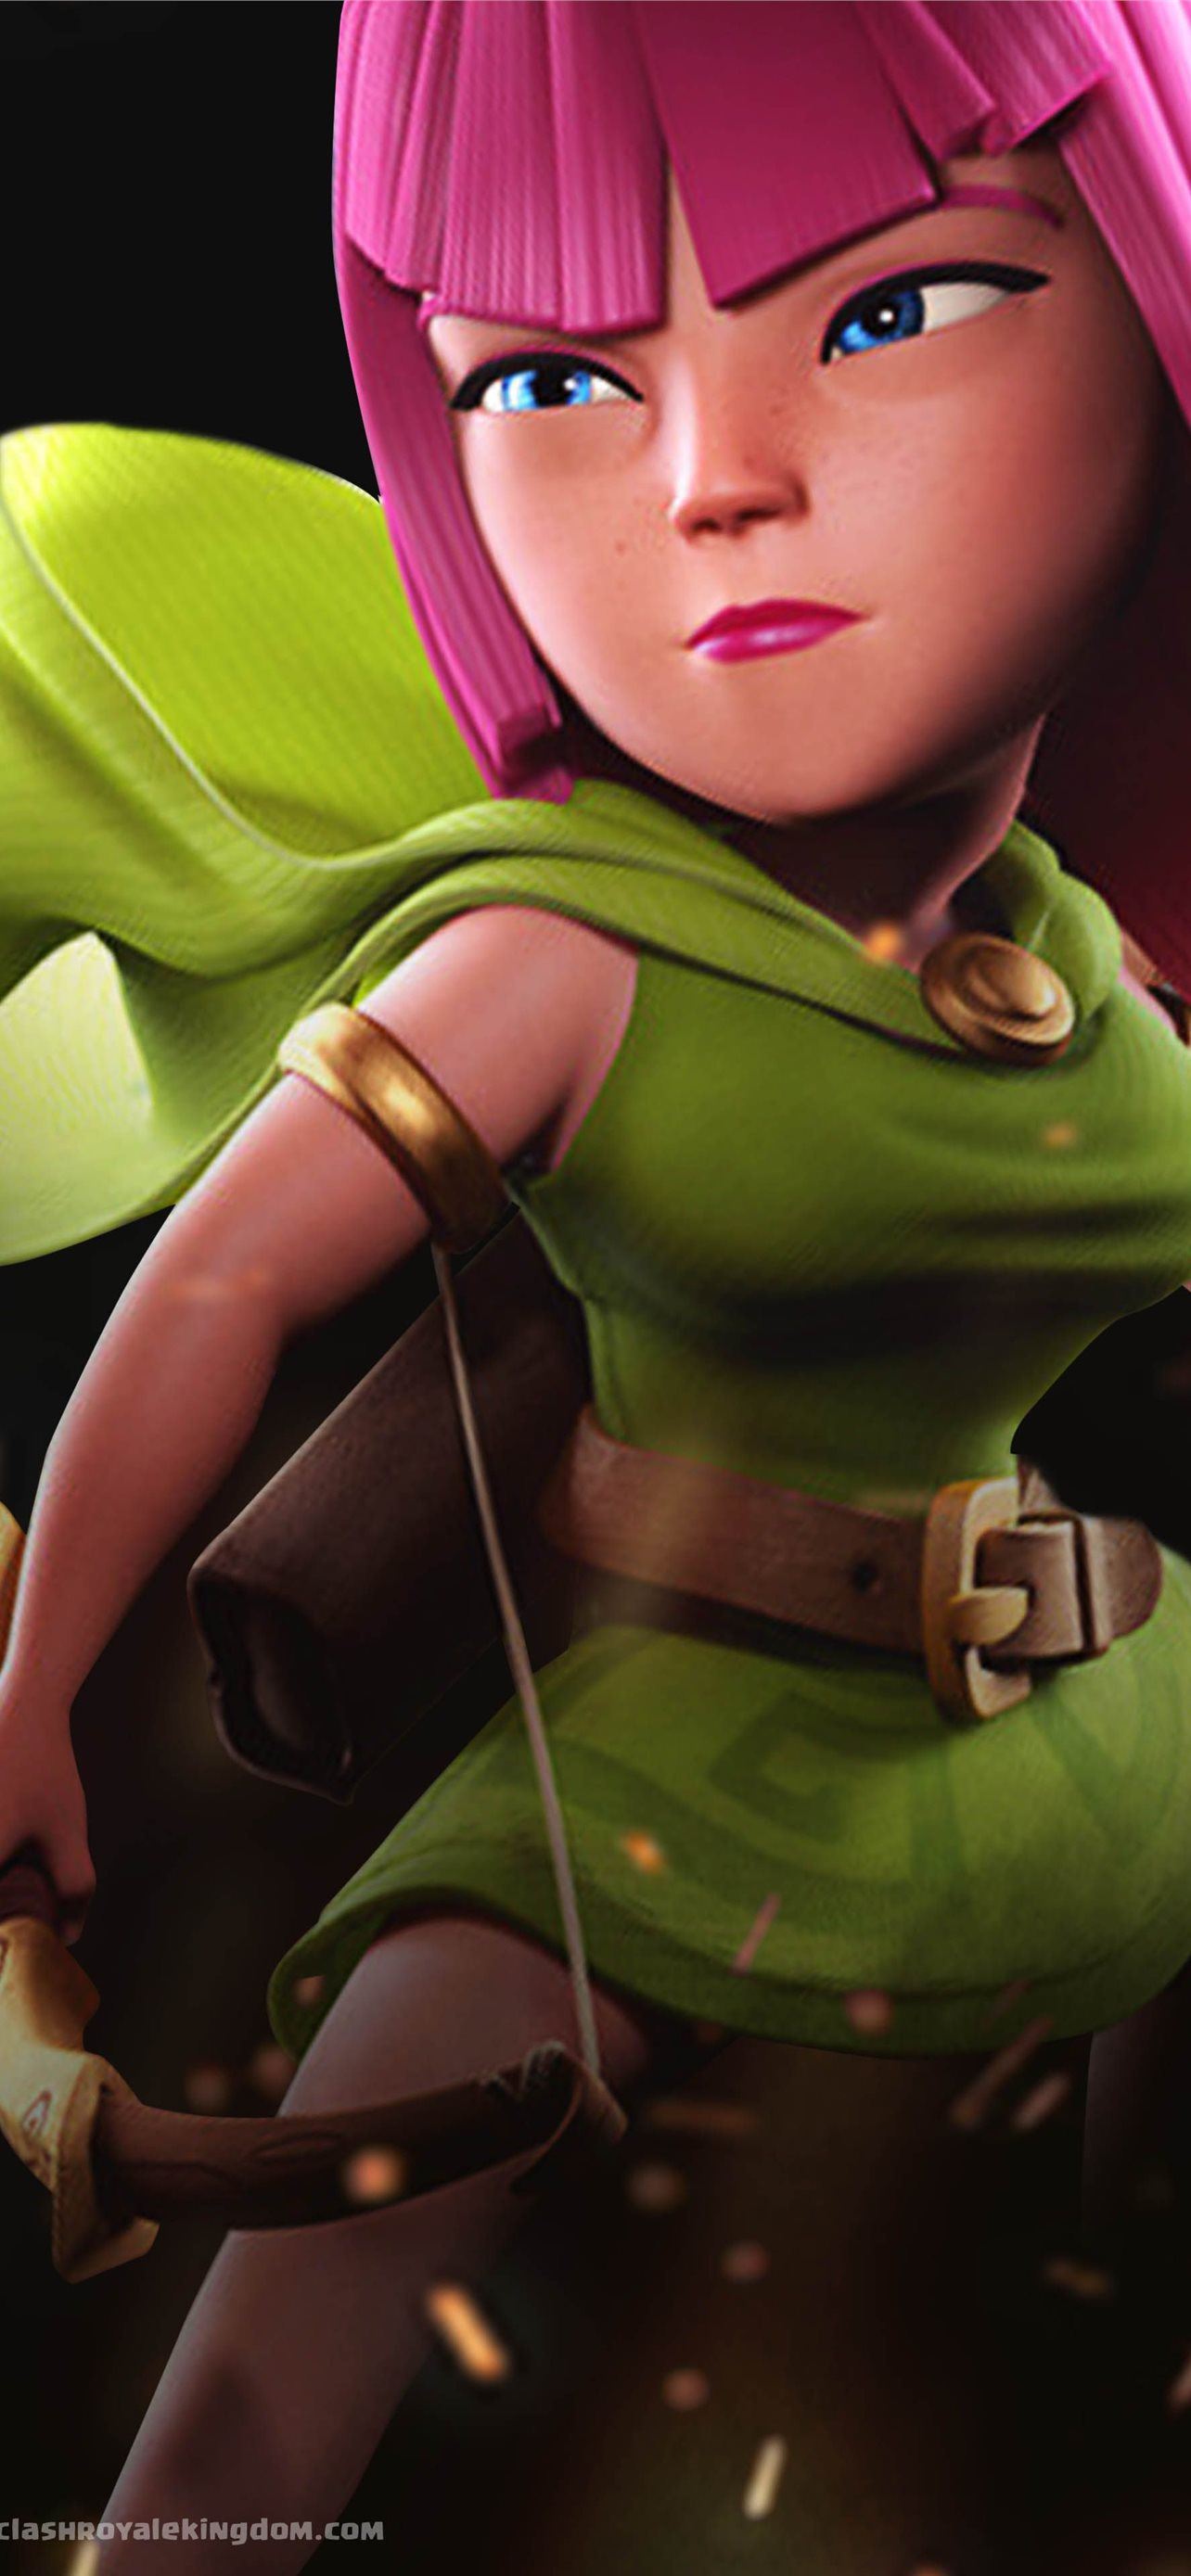 Download Wallpaper Clash Of Clans Nomer 54